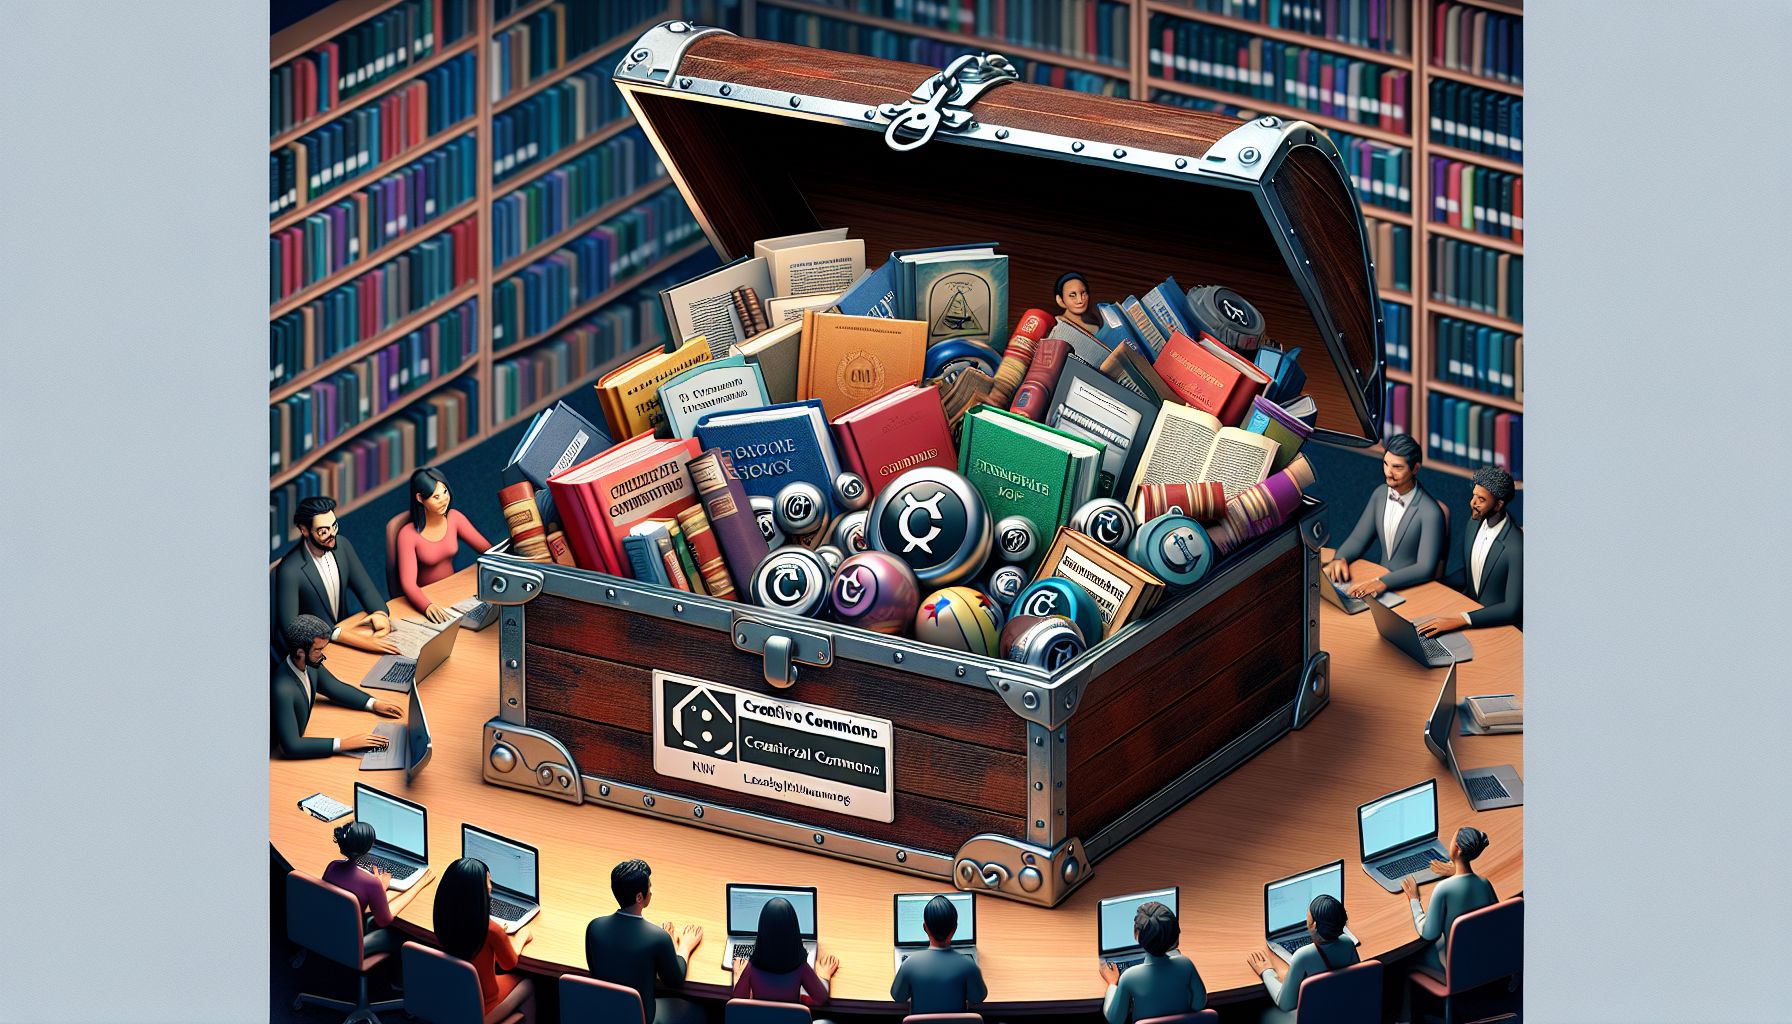 Open Educational Resources: A Treasure Trove for University Students